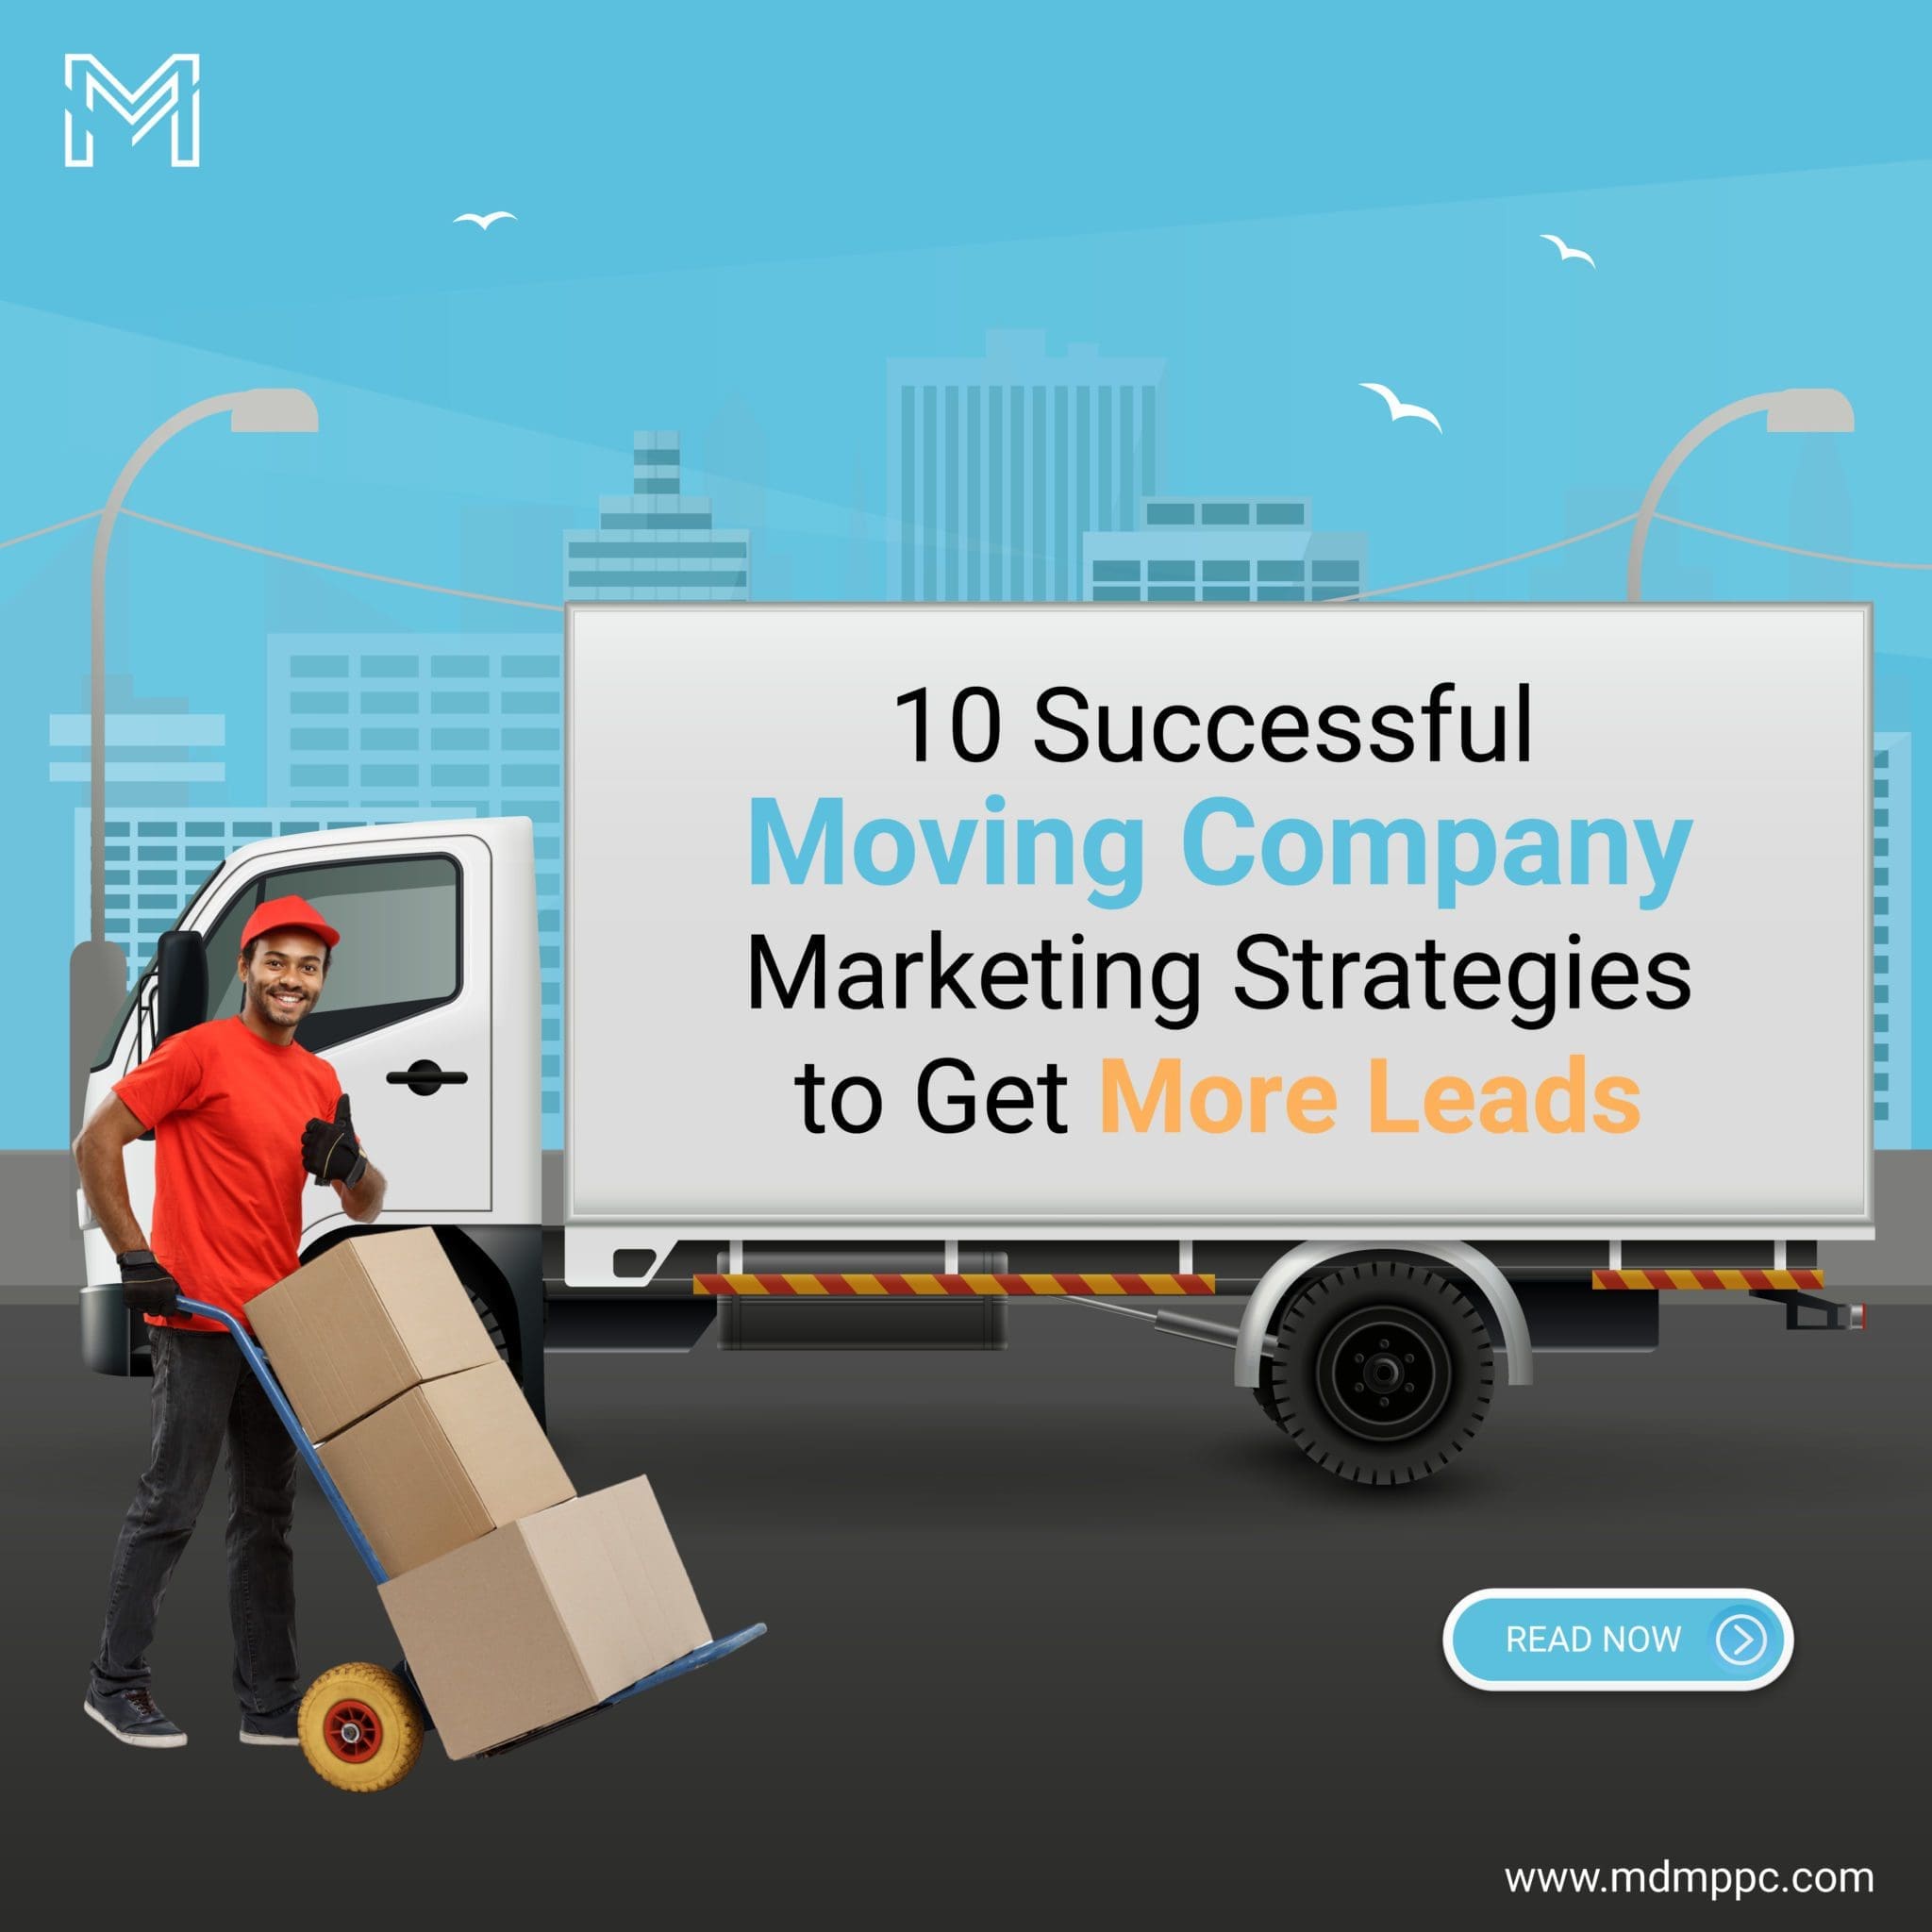 10 Best Moving Company Marketing Strategies to Get More Leads